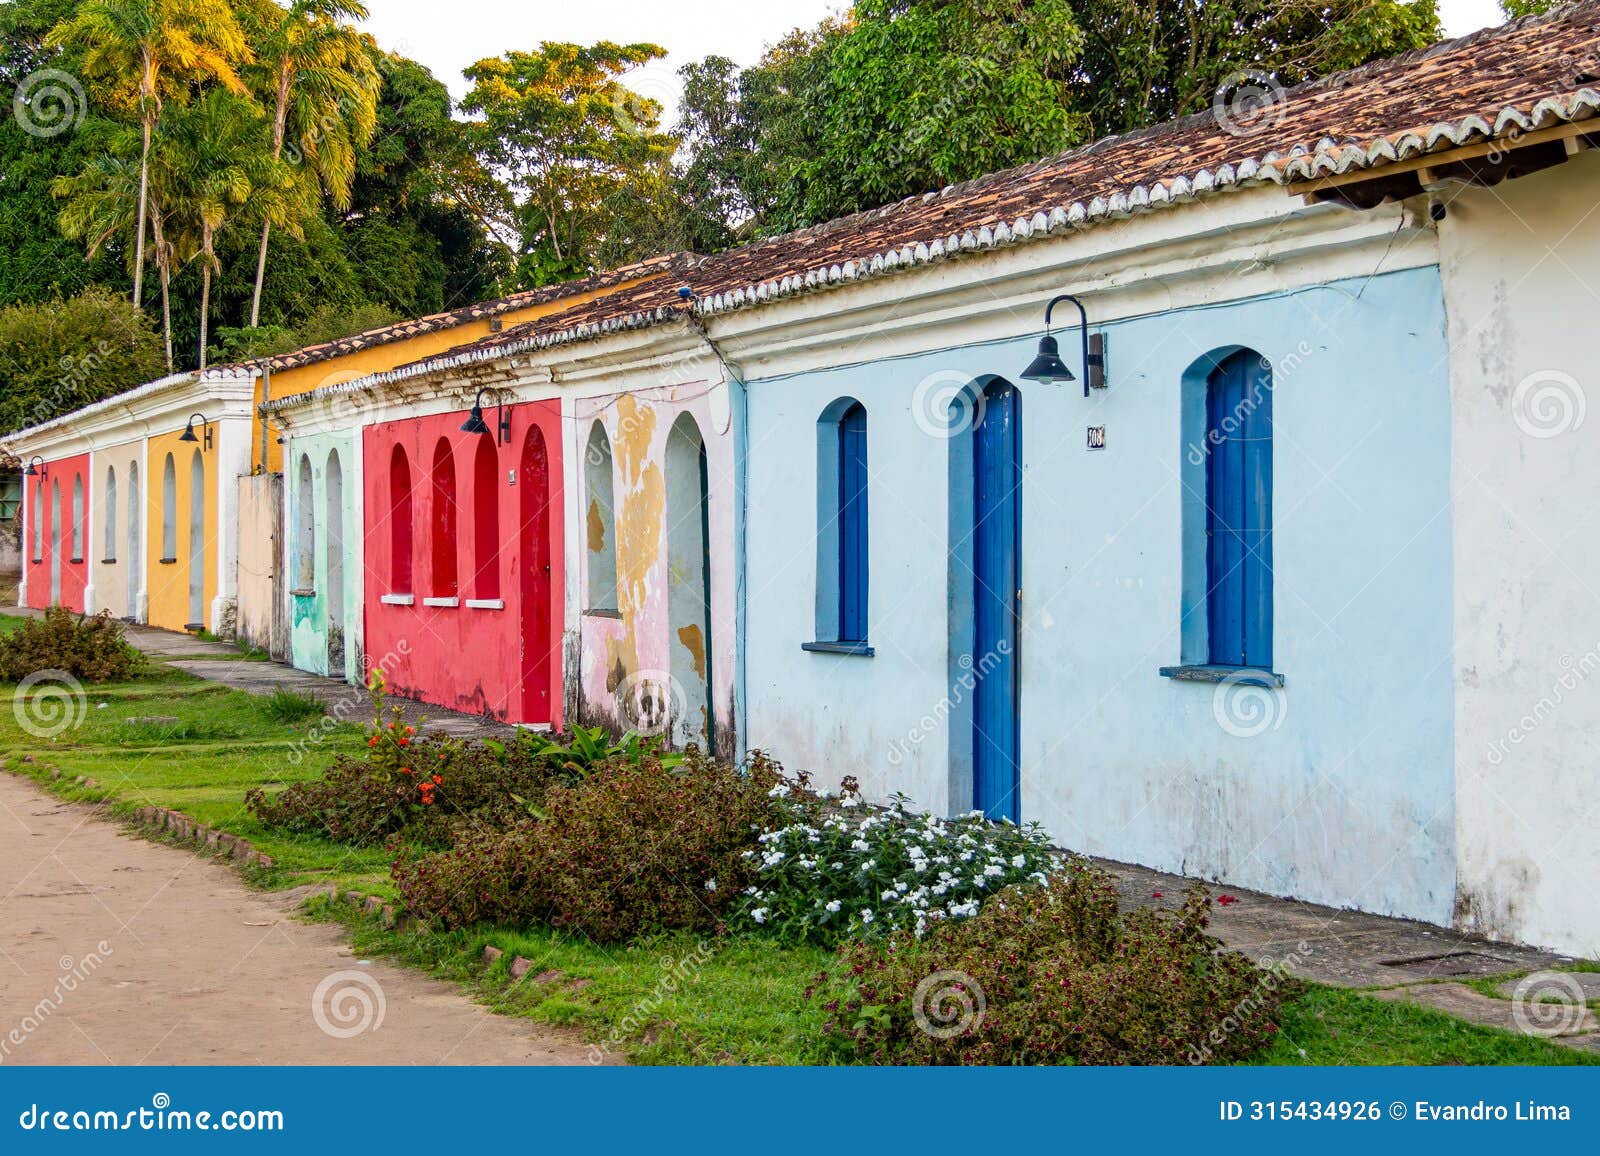 historic old houses in the historic center of the old town of porto seguro, in the state of bahia, brazil